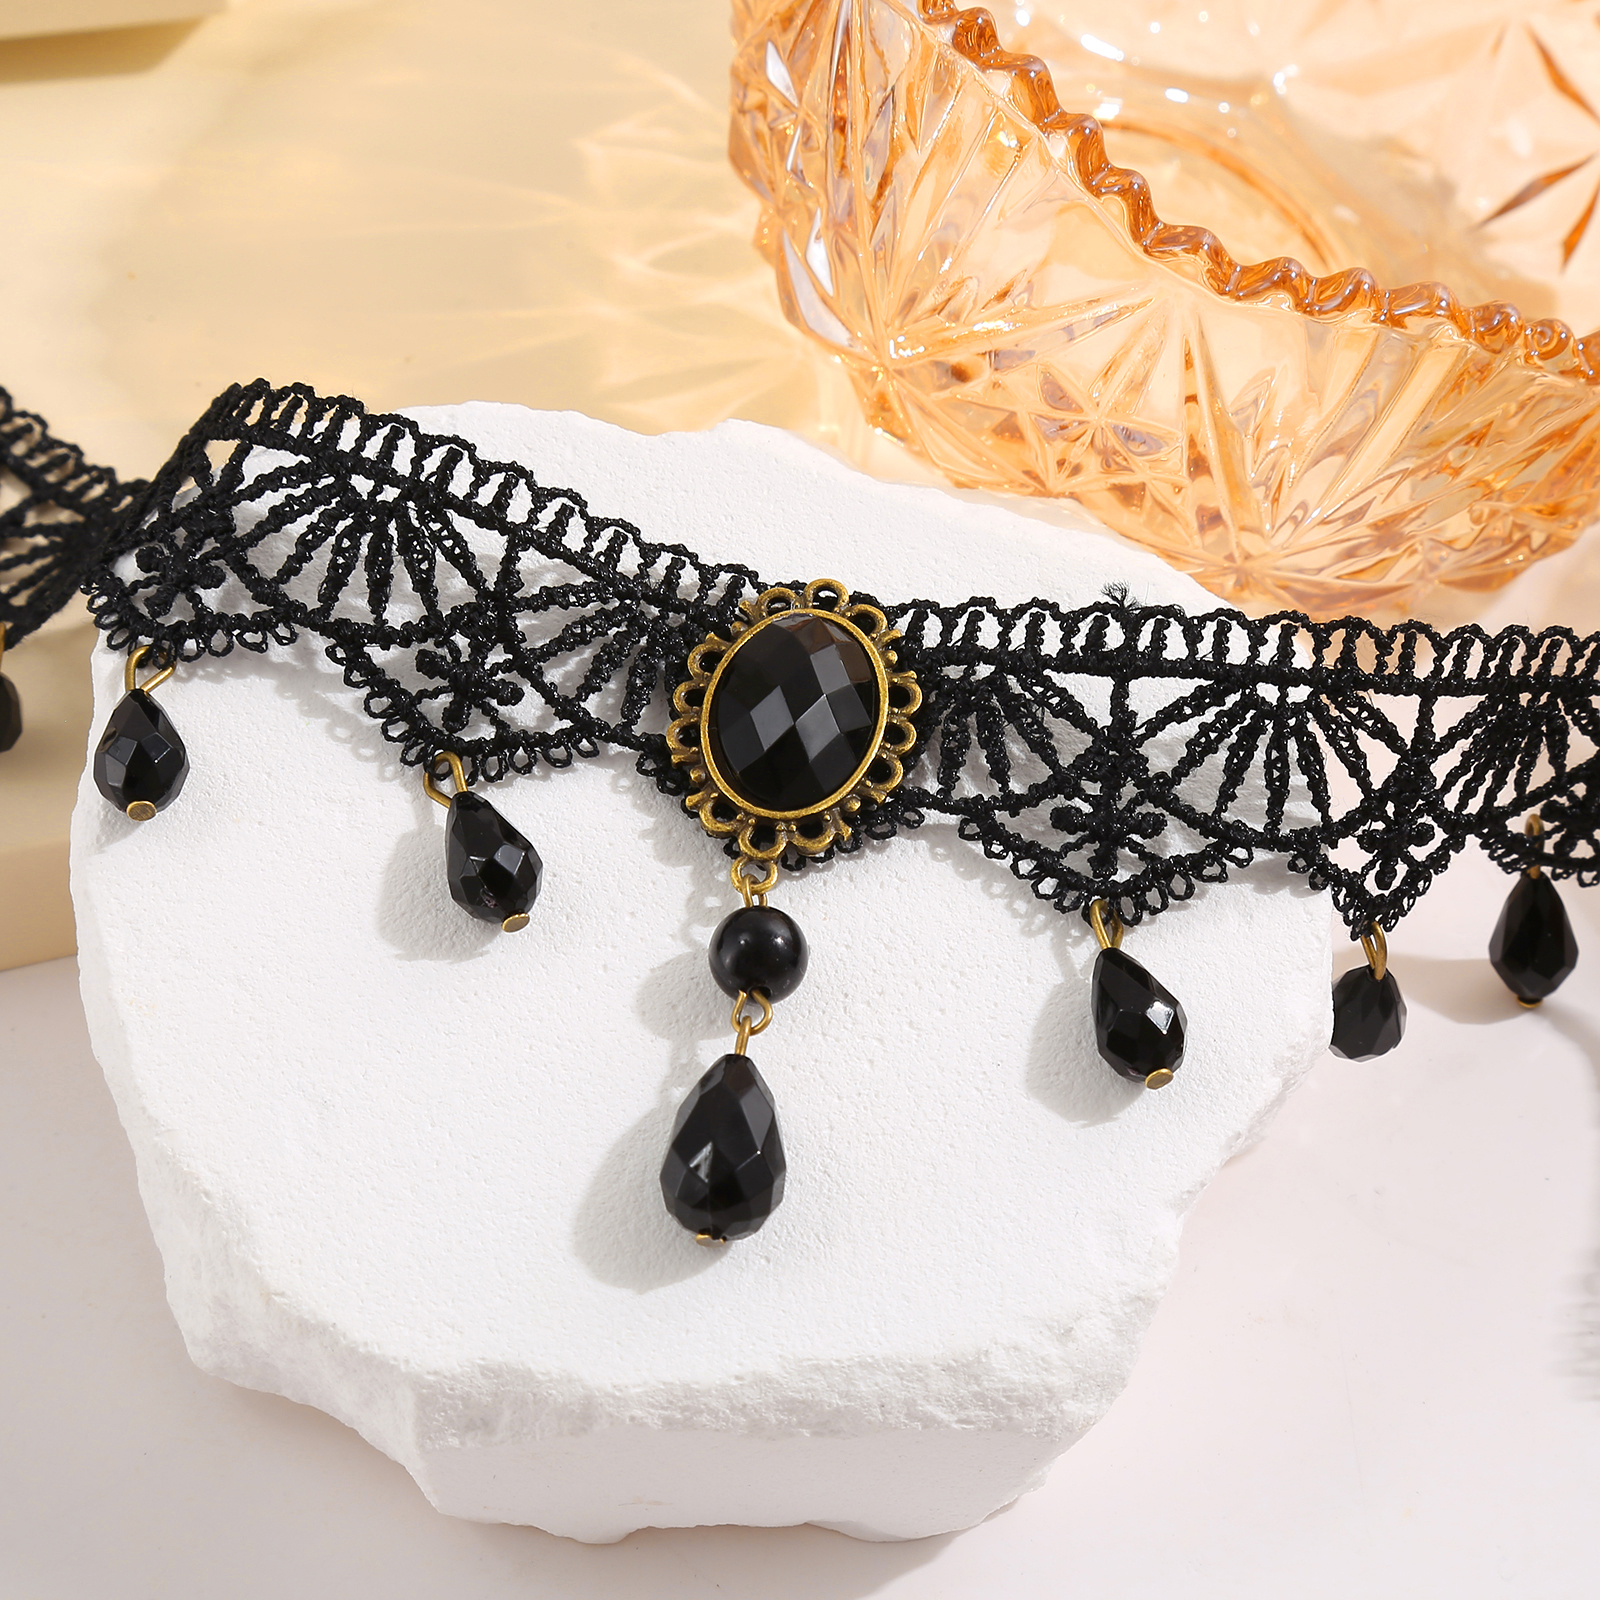 LACE CHOKER NECKLACE CHARM NECKLACE BLACK TATTOO CHOKER PUNK DOUBLE LAYER  CHAIN